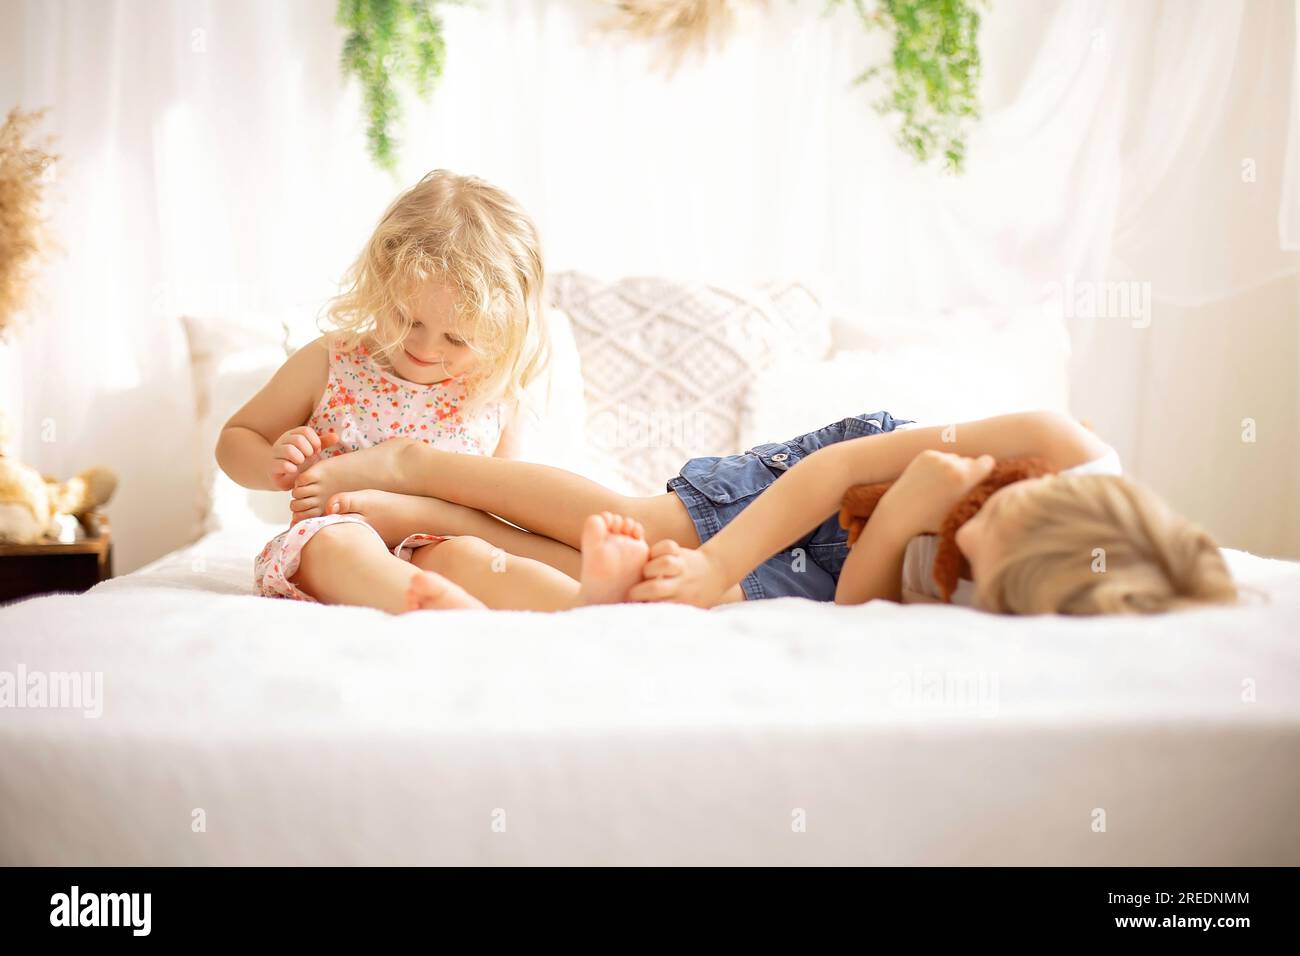 Cute sweet toddler children, tickling feet on the bed, laughing and smiling, childish mischief, happiness Stock Photo